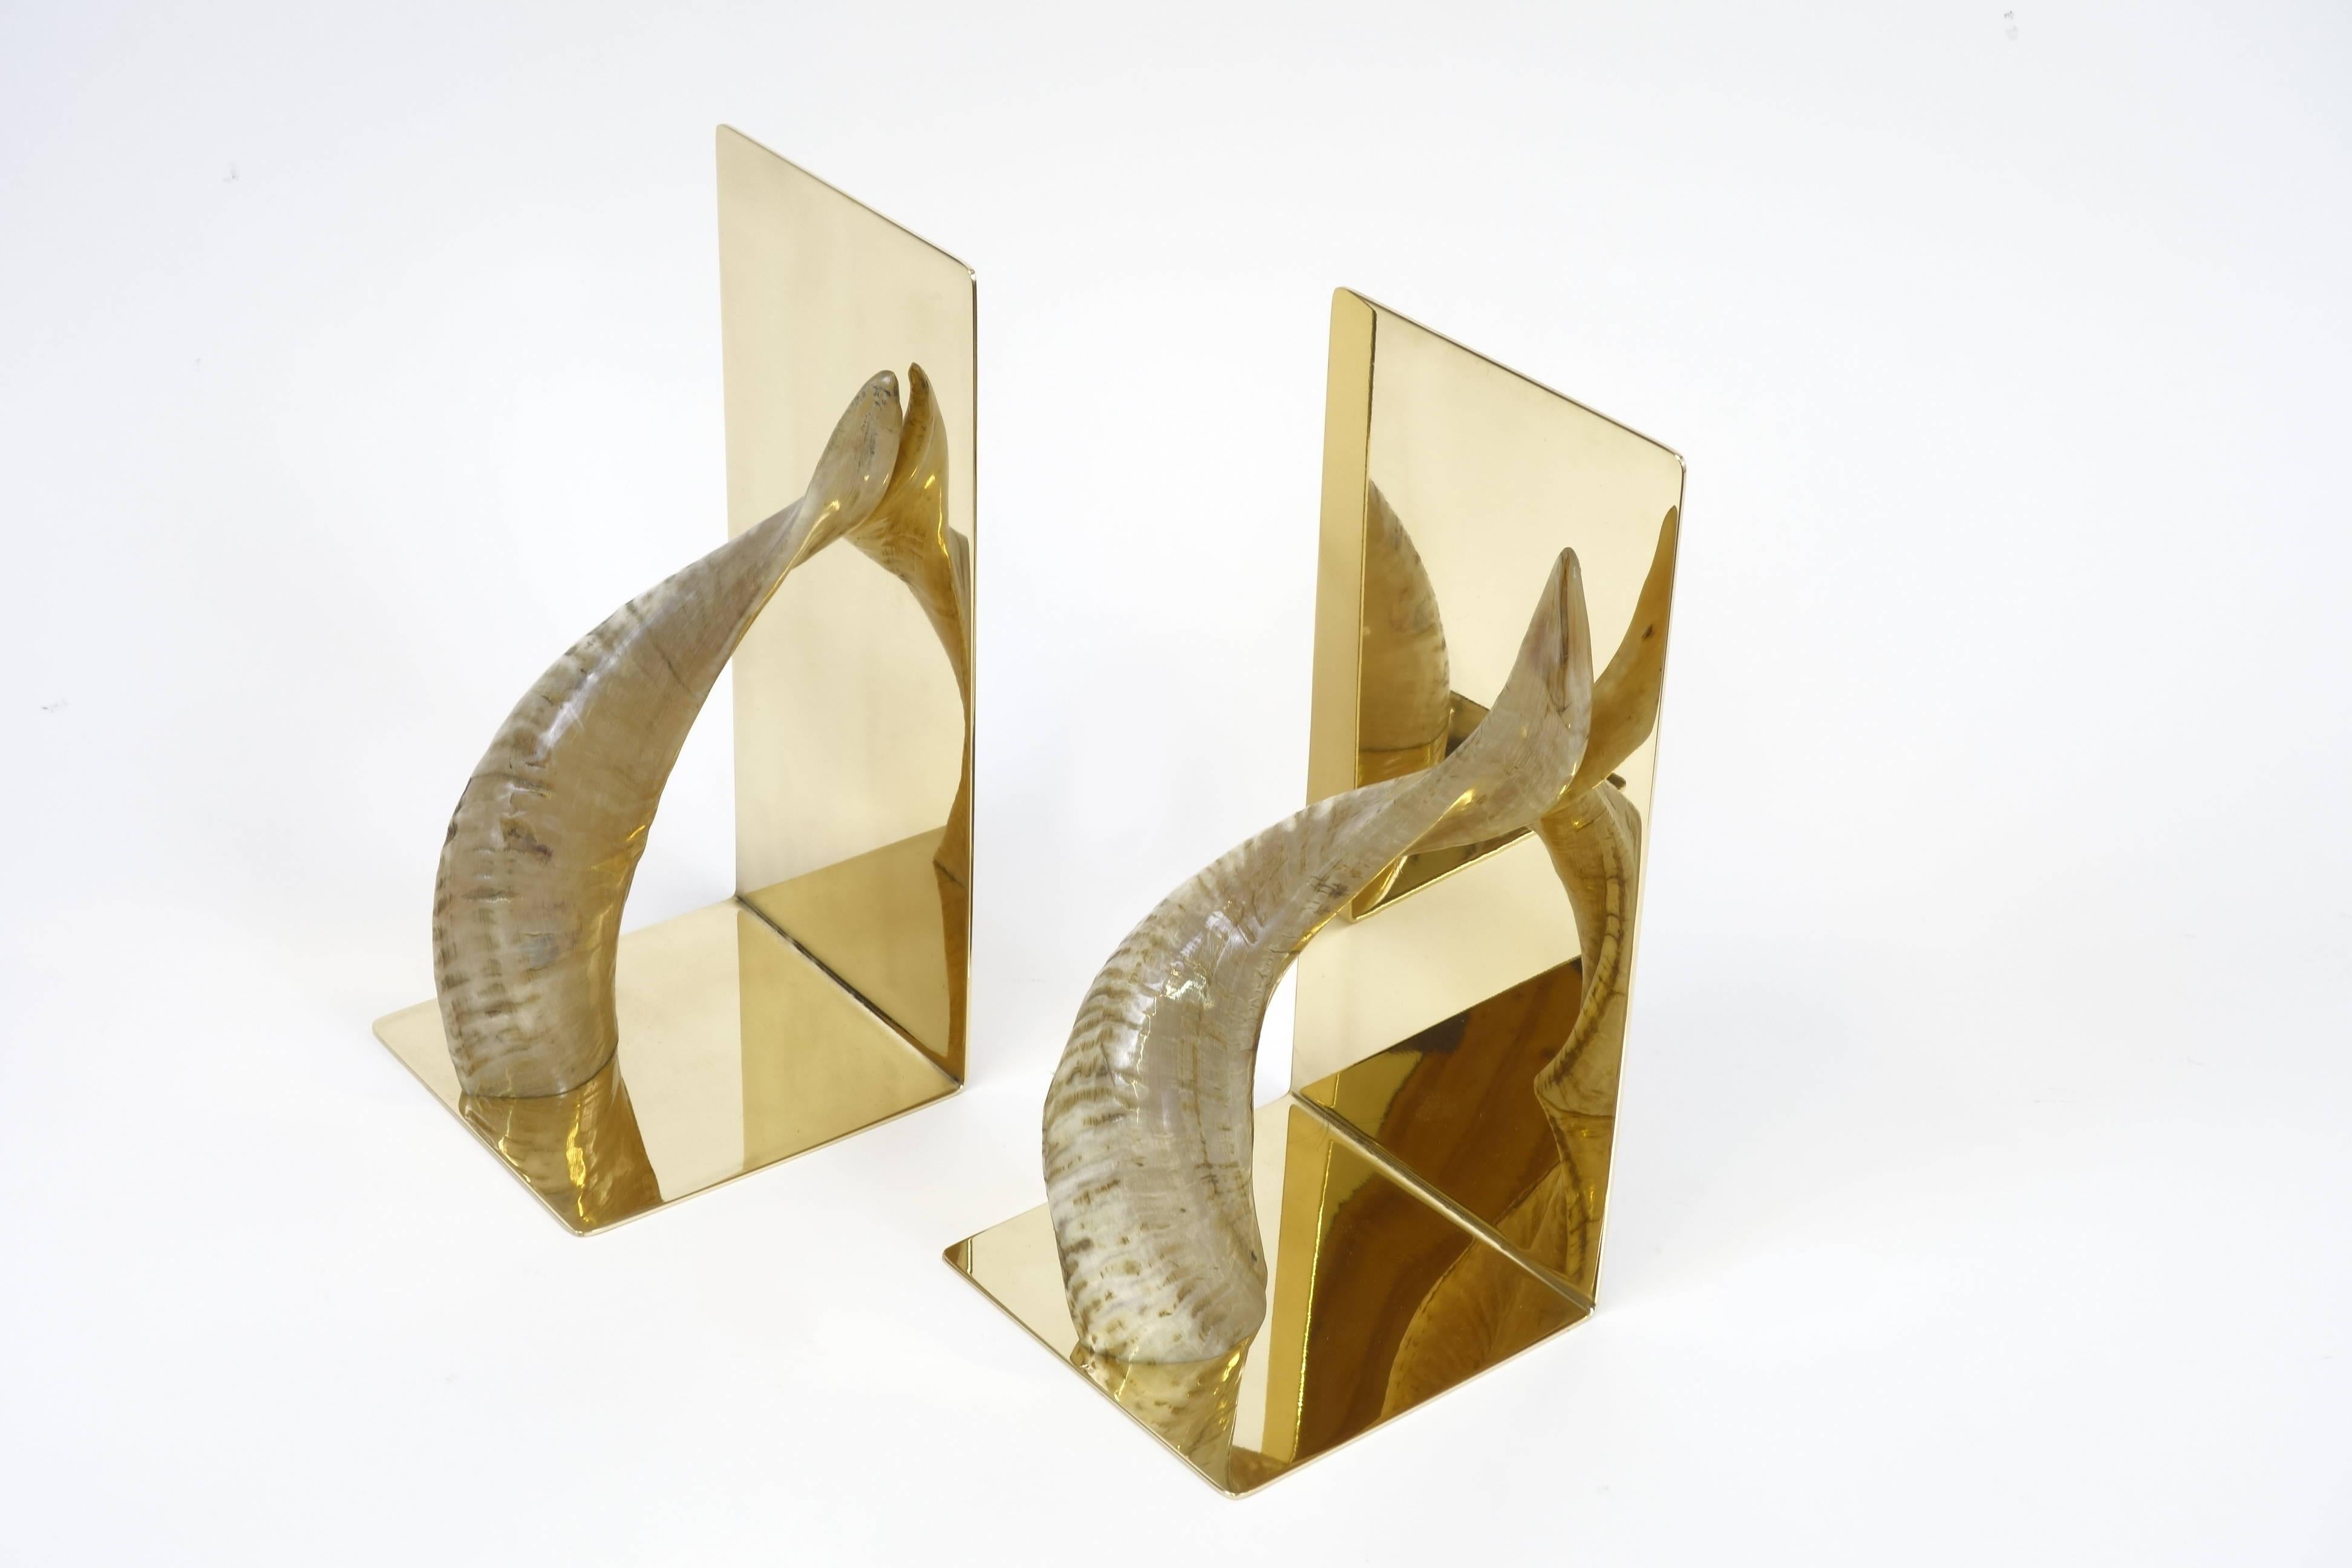 A pair of large solid brass bookends created and manufactured by the Austrian architect and designer Carl Auböck. These outstanding objects made of solid polished and decorated brass will provide understated luxury on each bookshelf. Curves as well